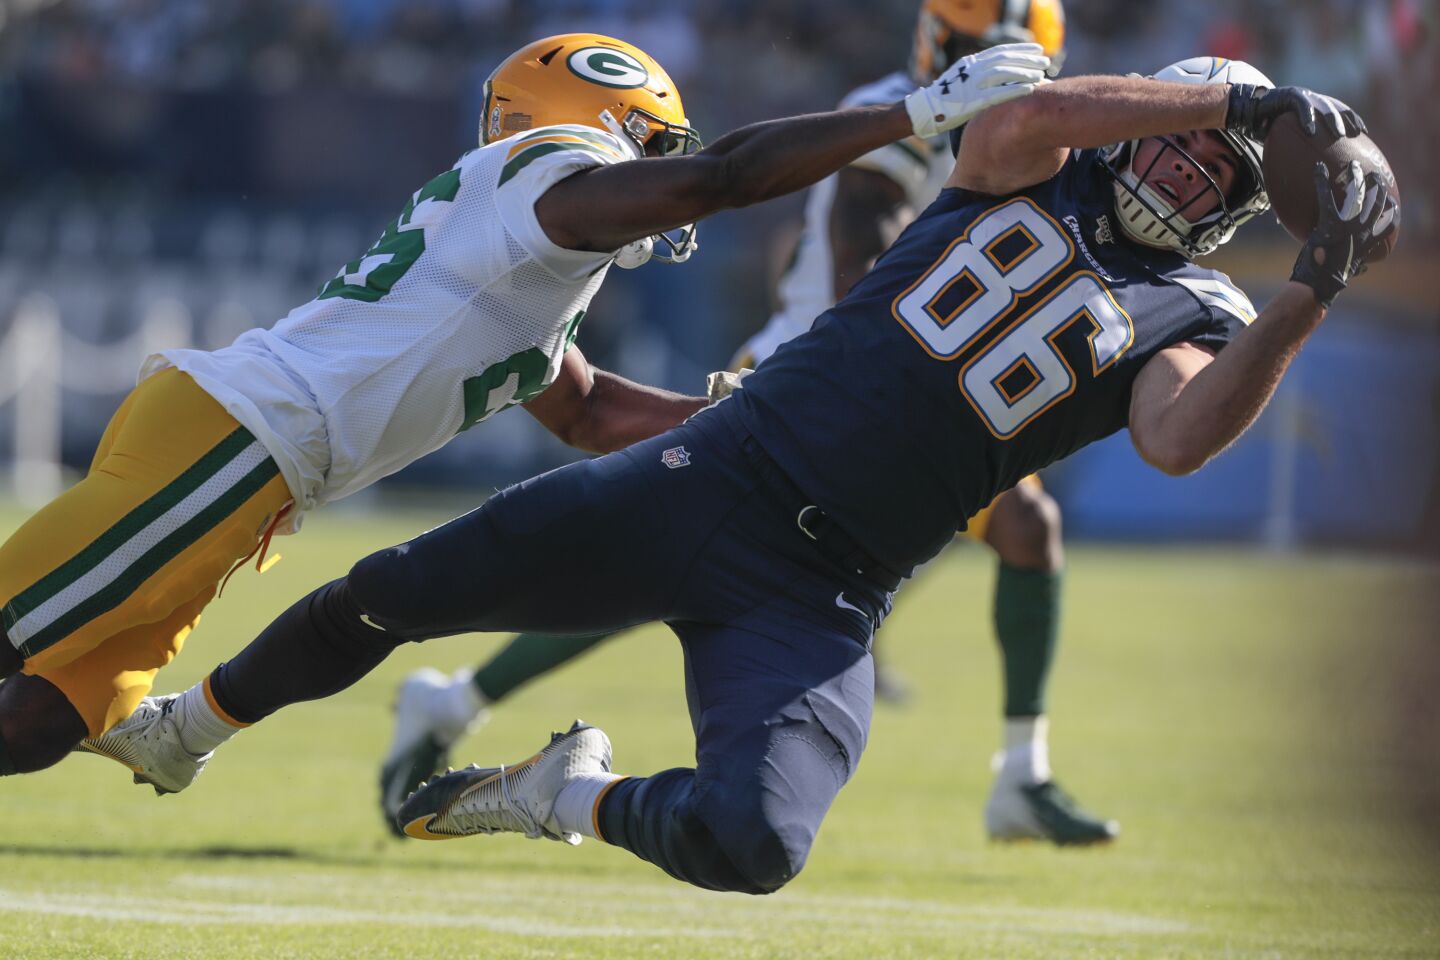 Chargers tight end Hunter Henry catches pass in front of Packers defensive back Darnell Savage.